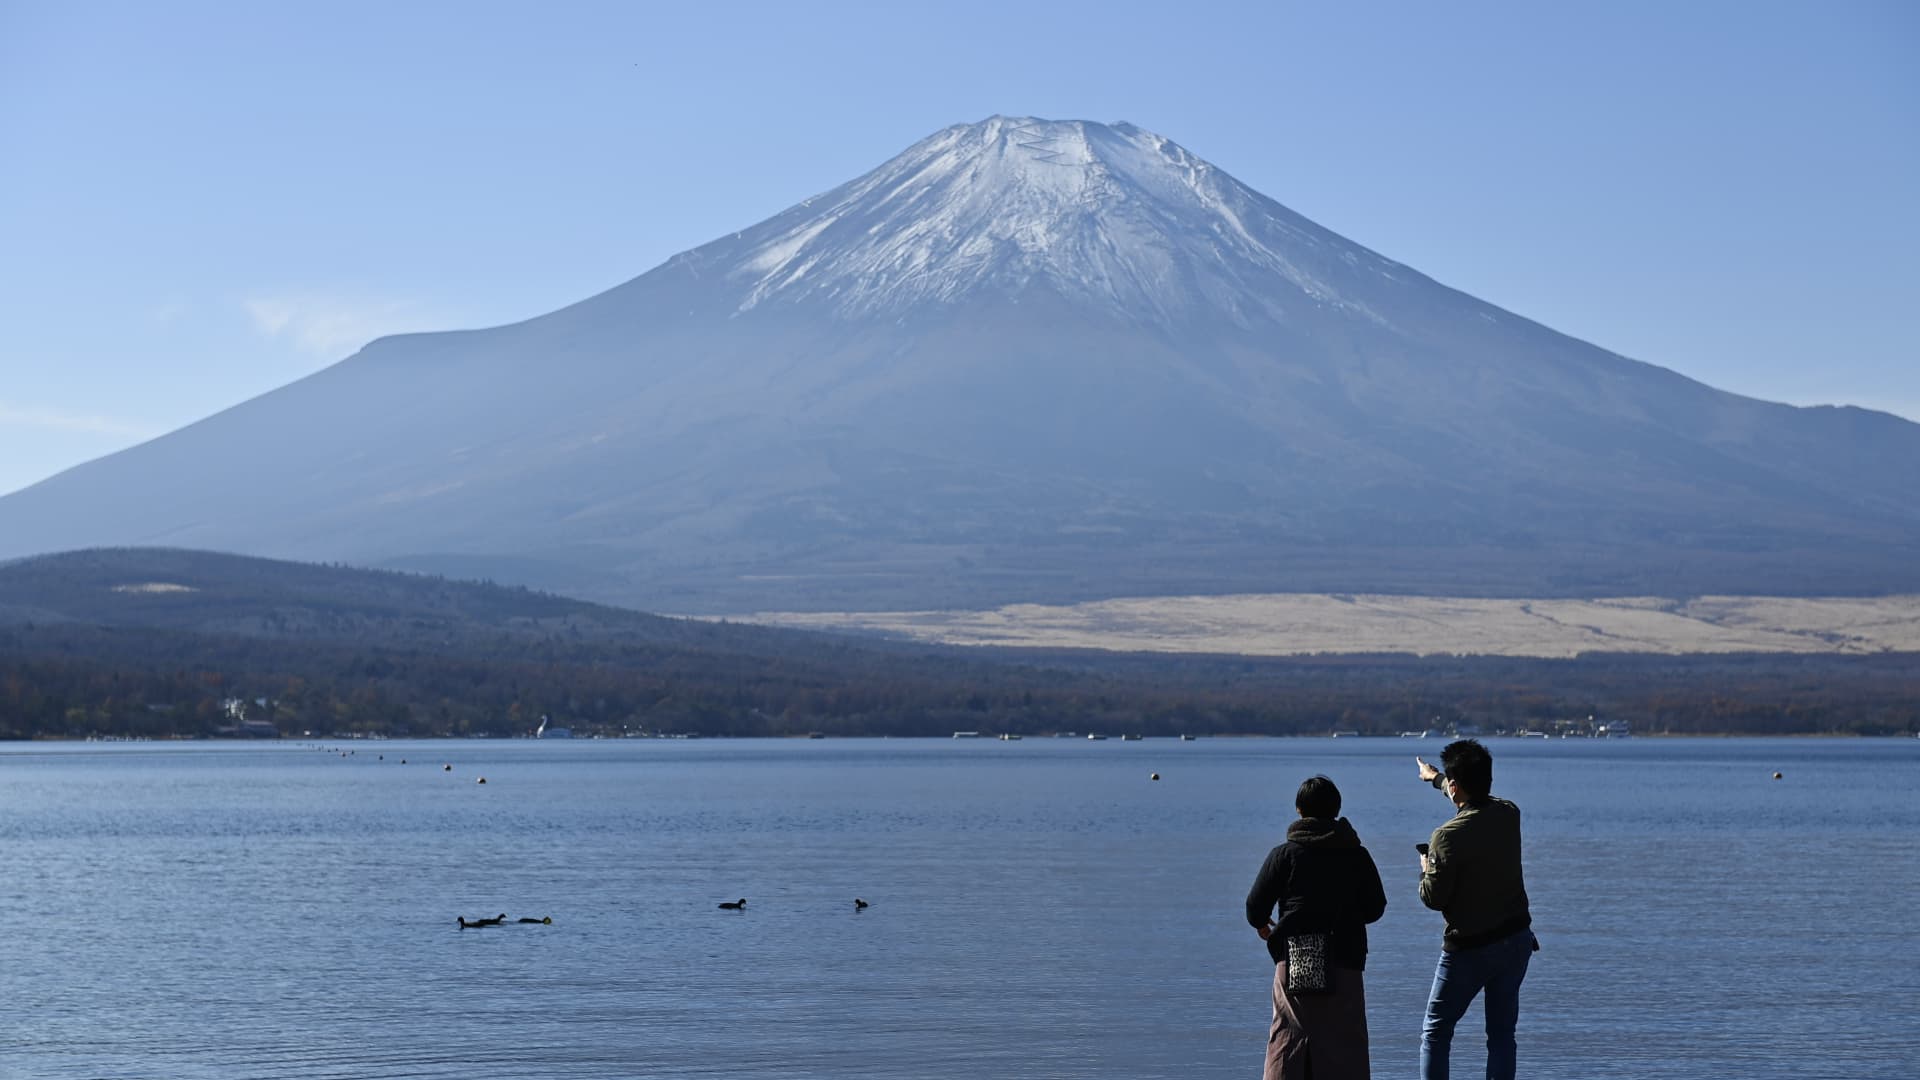 Wanping Aw said it can take three to four hours to reach Mount Fuji from Tokyo on weekends because of traffic jams. The journey usually takes around two hours, she said.